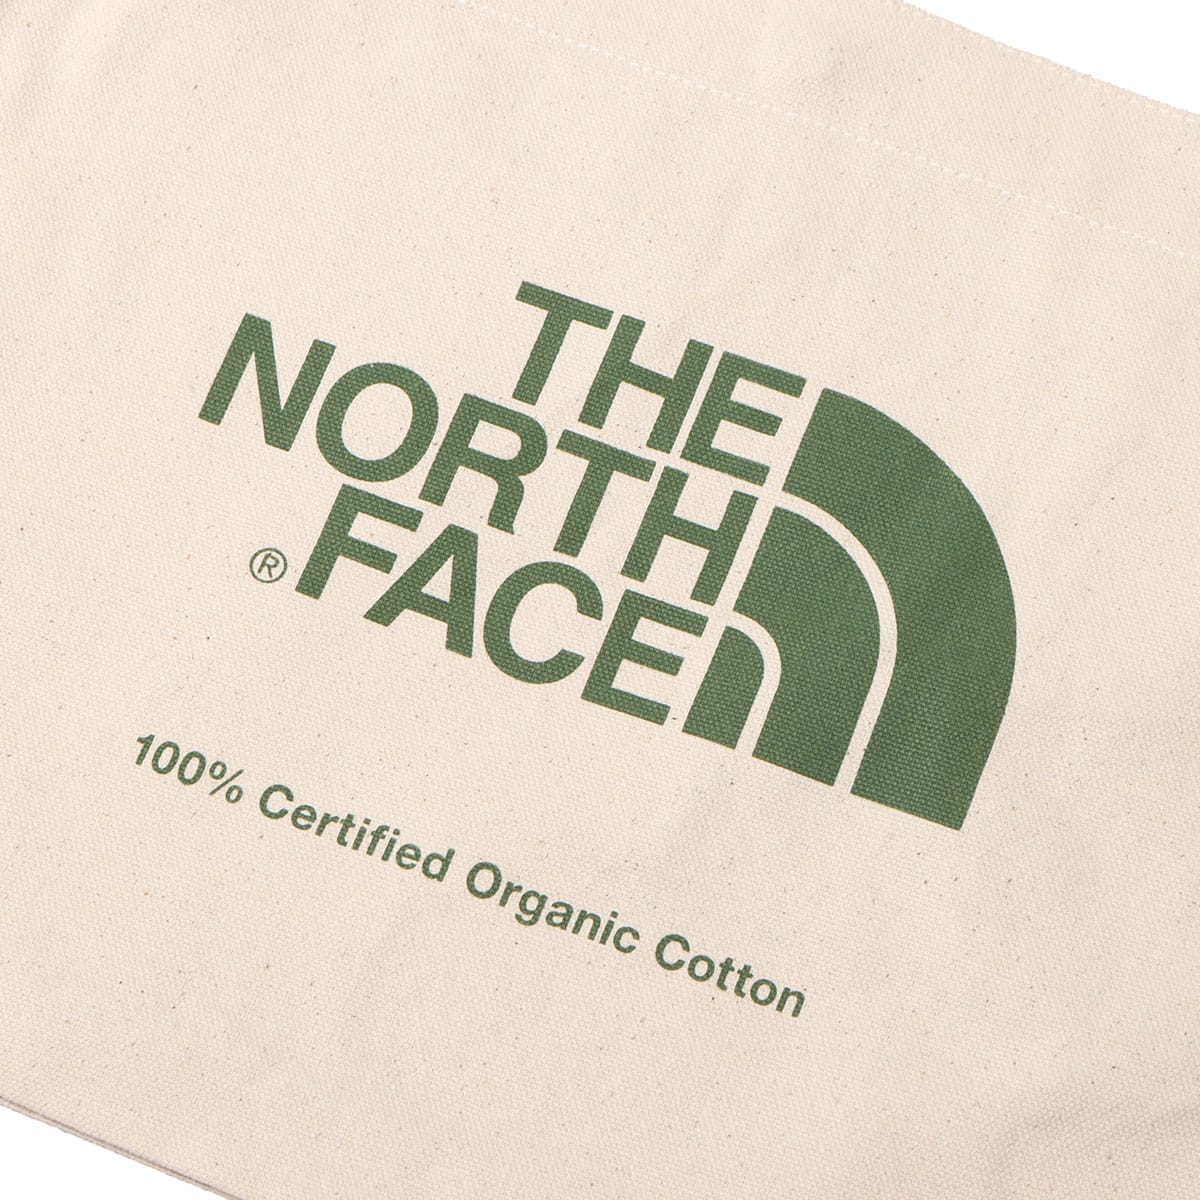 THE NORTH FACE ORGANIC COTTON MUSETTE NビンヤG